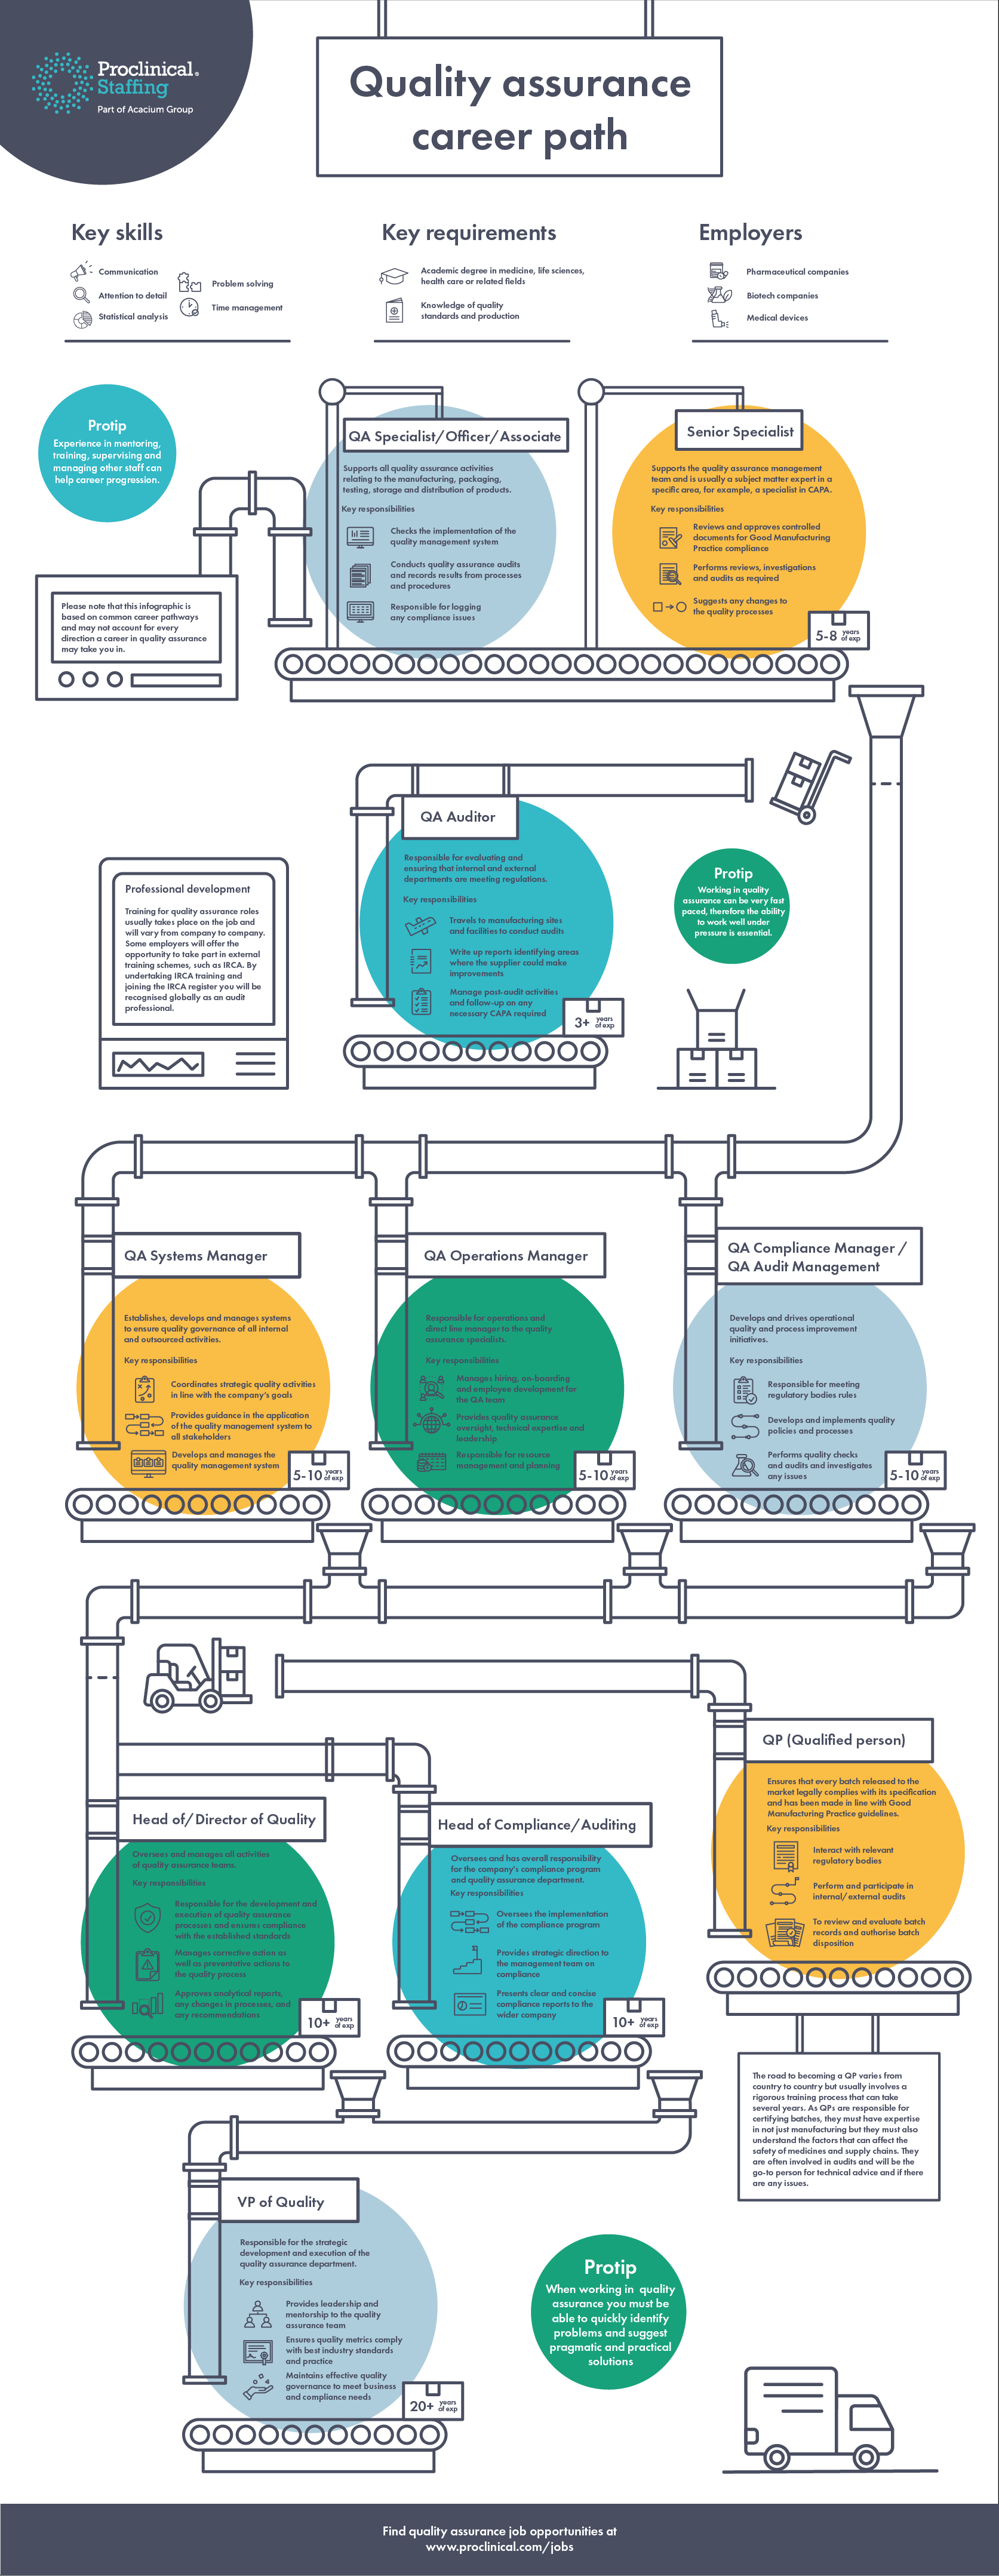 Infographic: Quality assurance career path